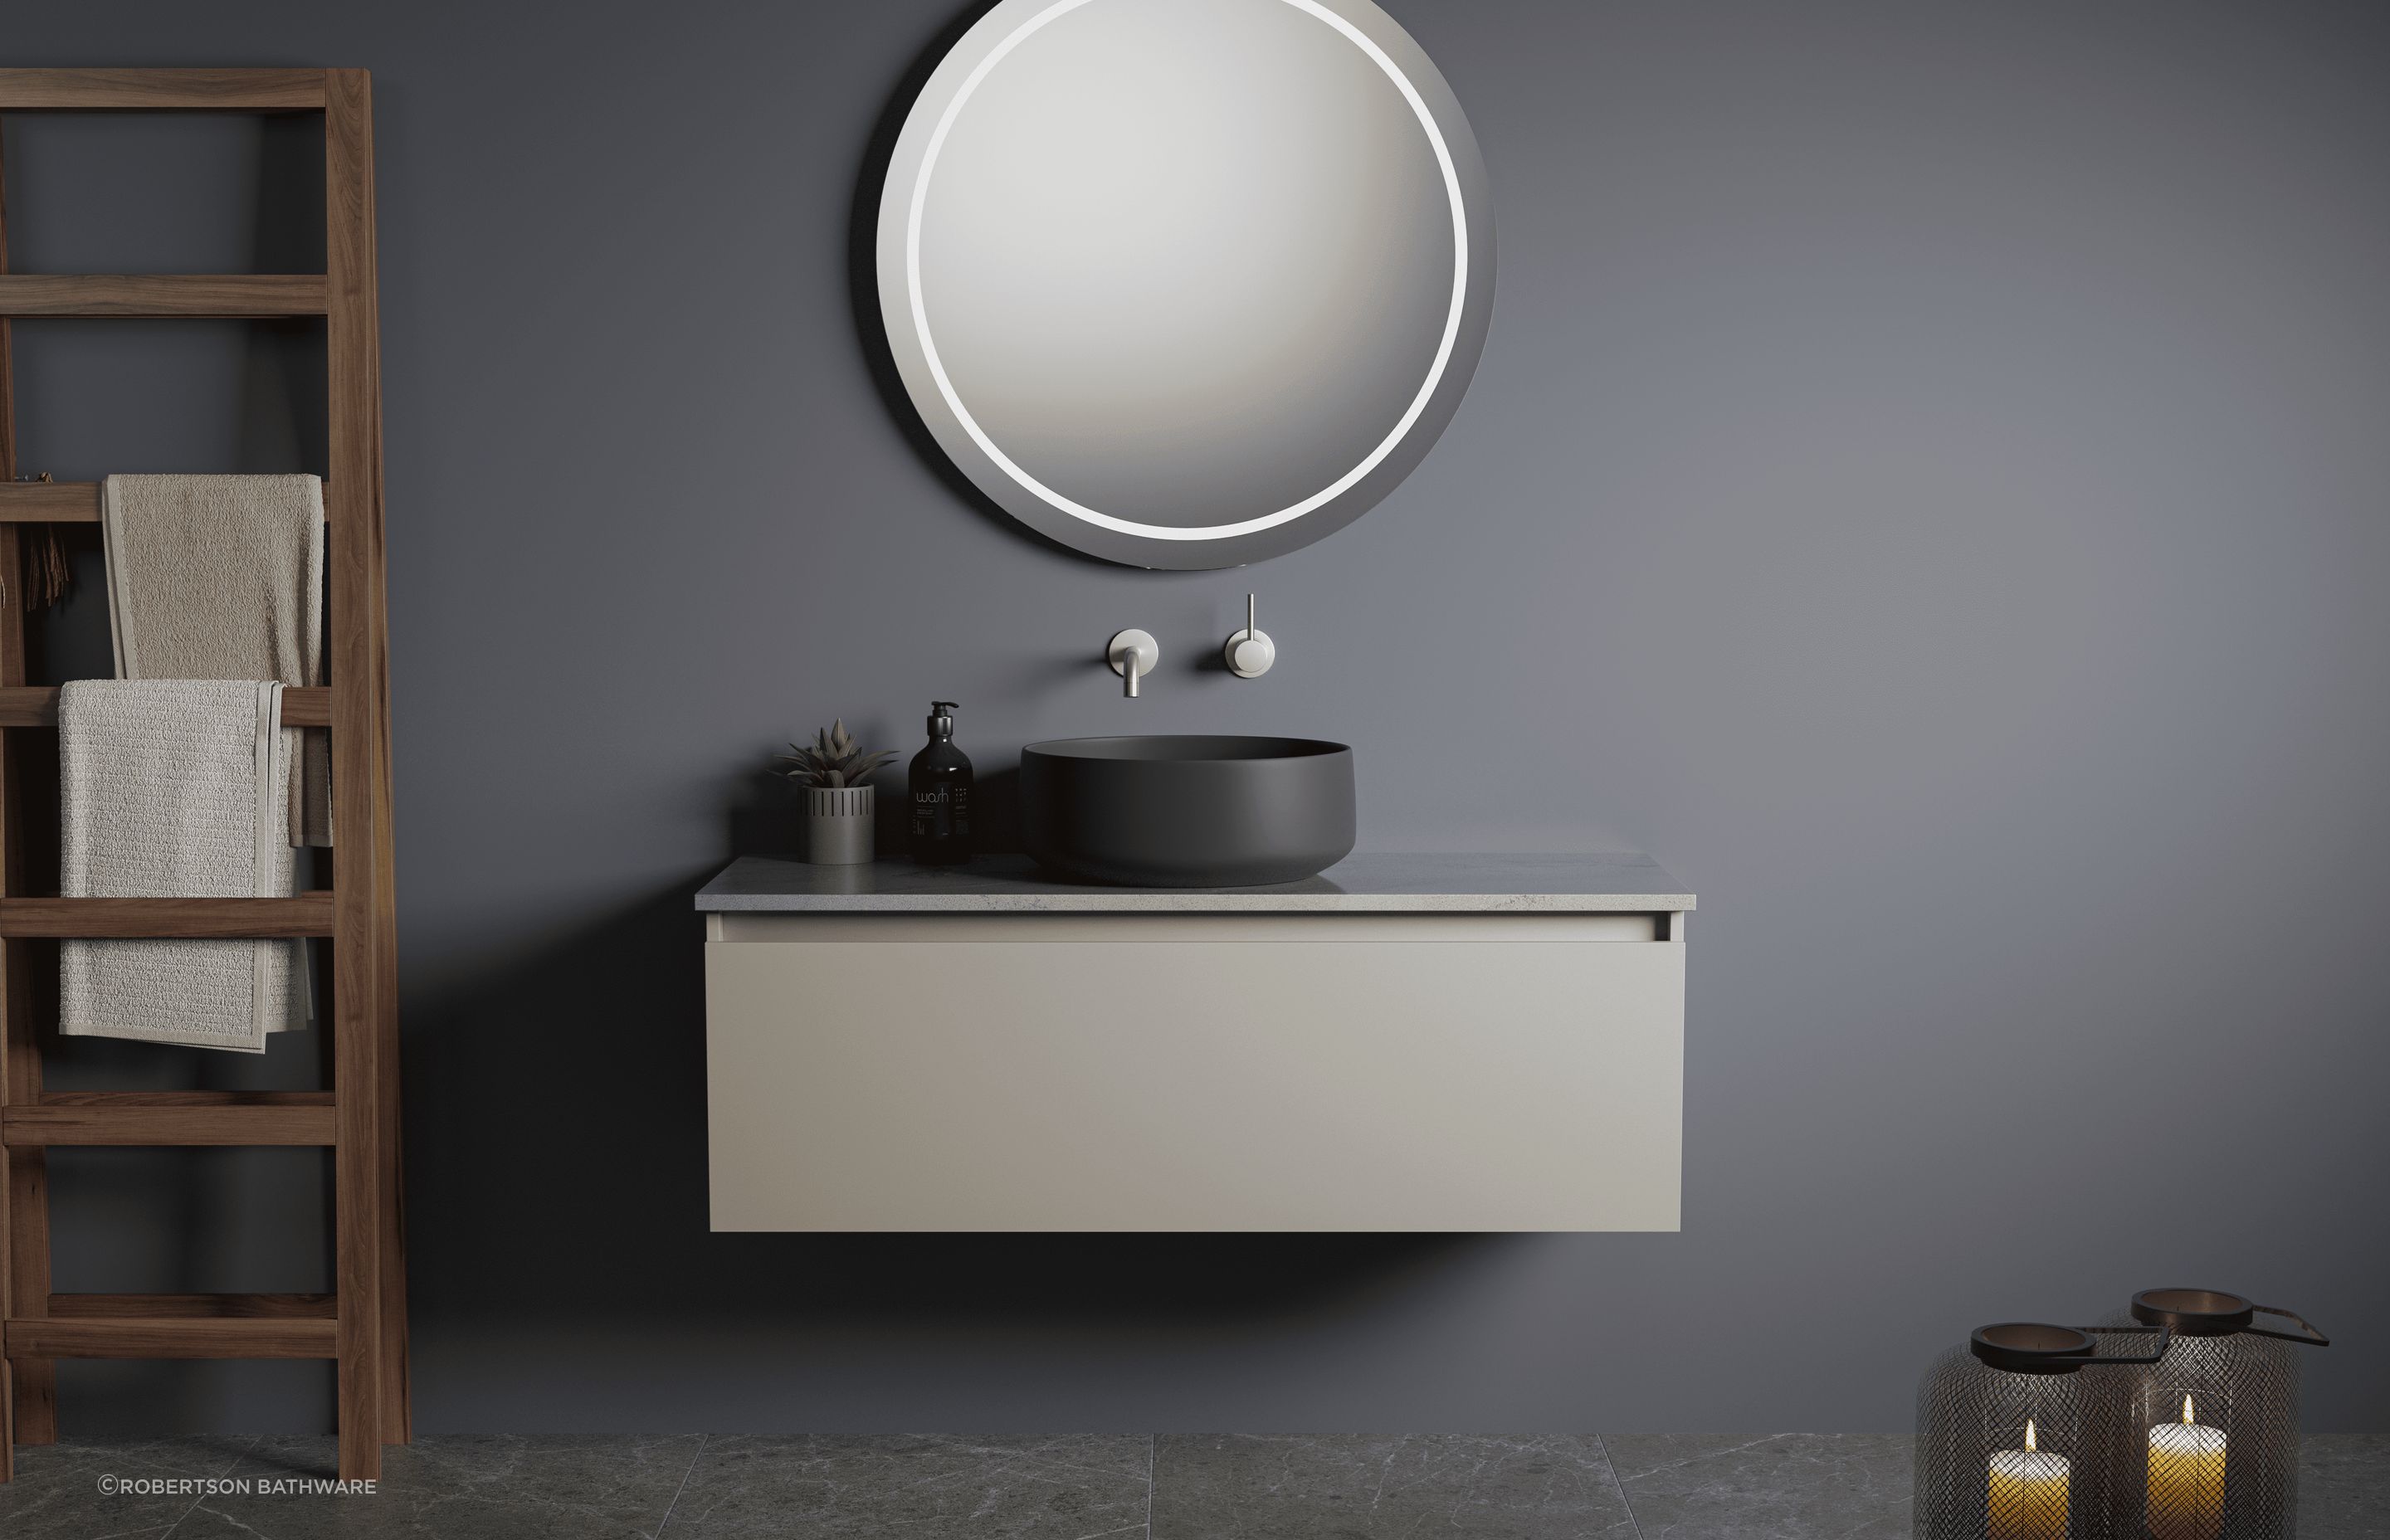 A stylish vessel basin combined with a sophisticated vanity like the Terina II Vanity makes an elegant pairing.